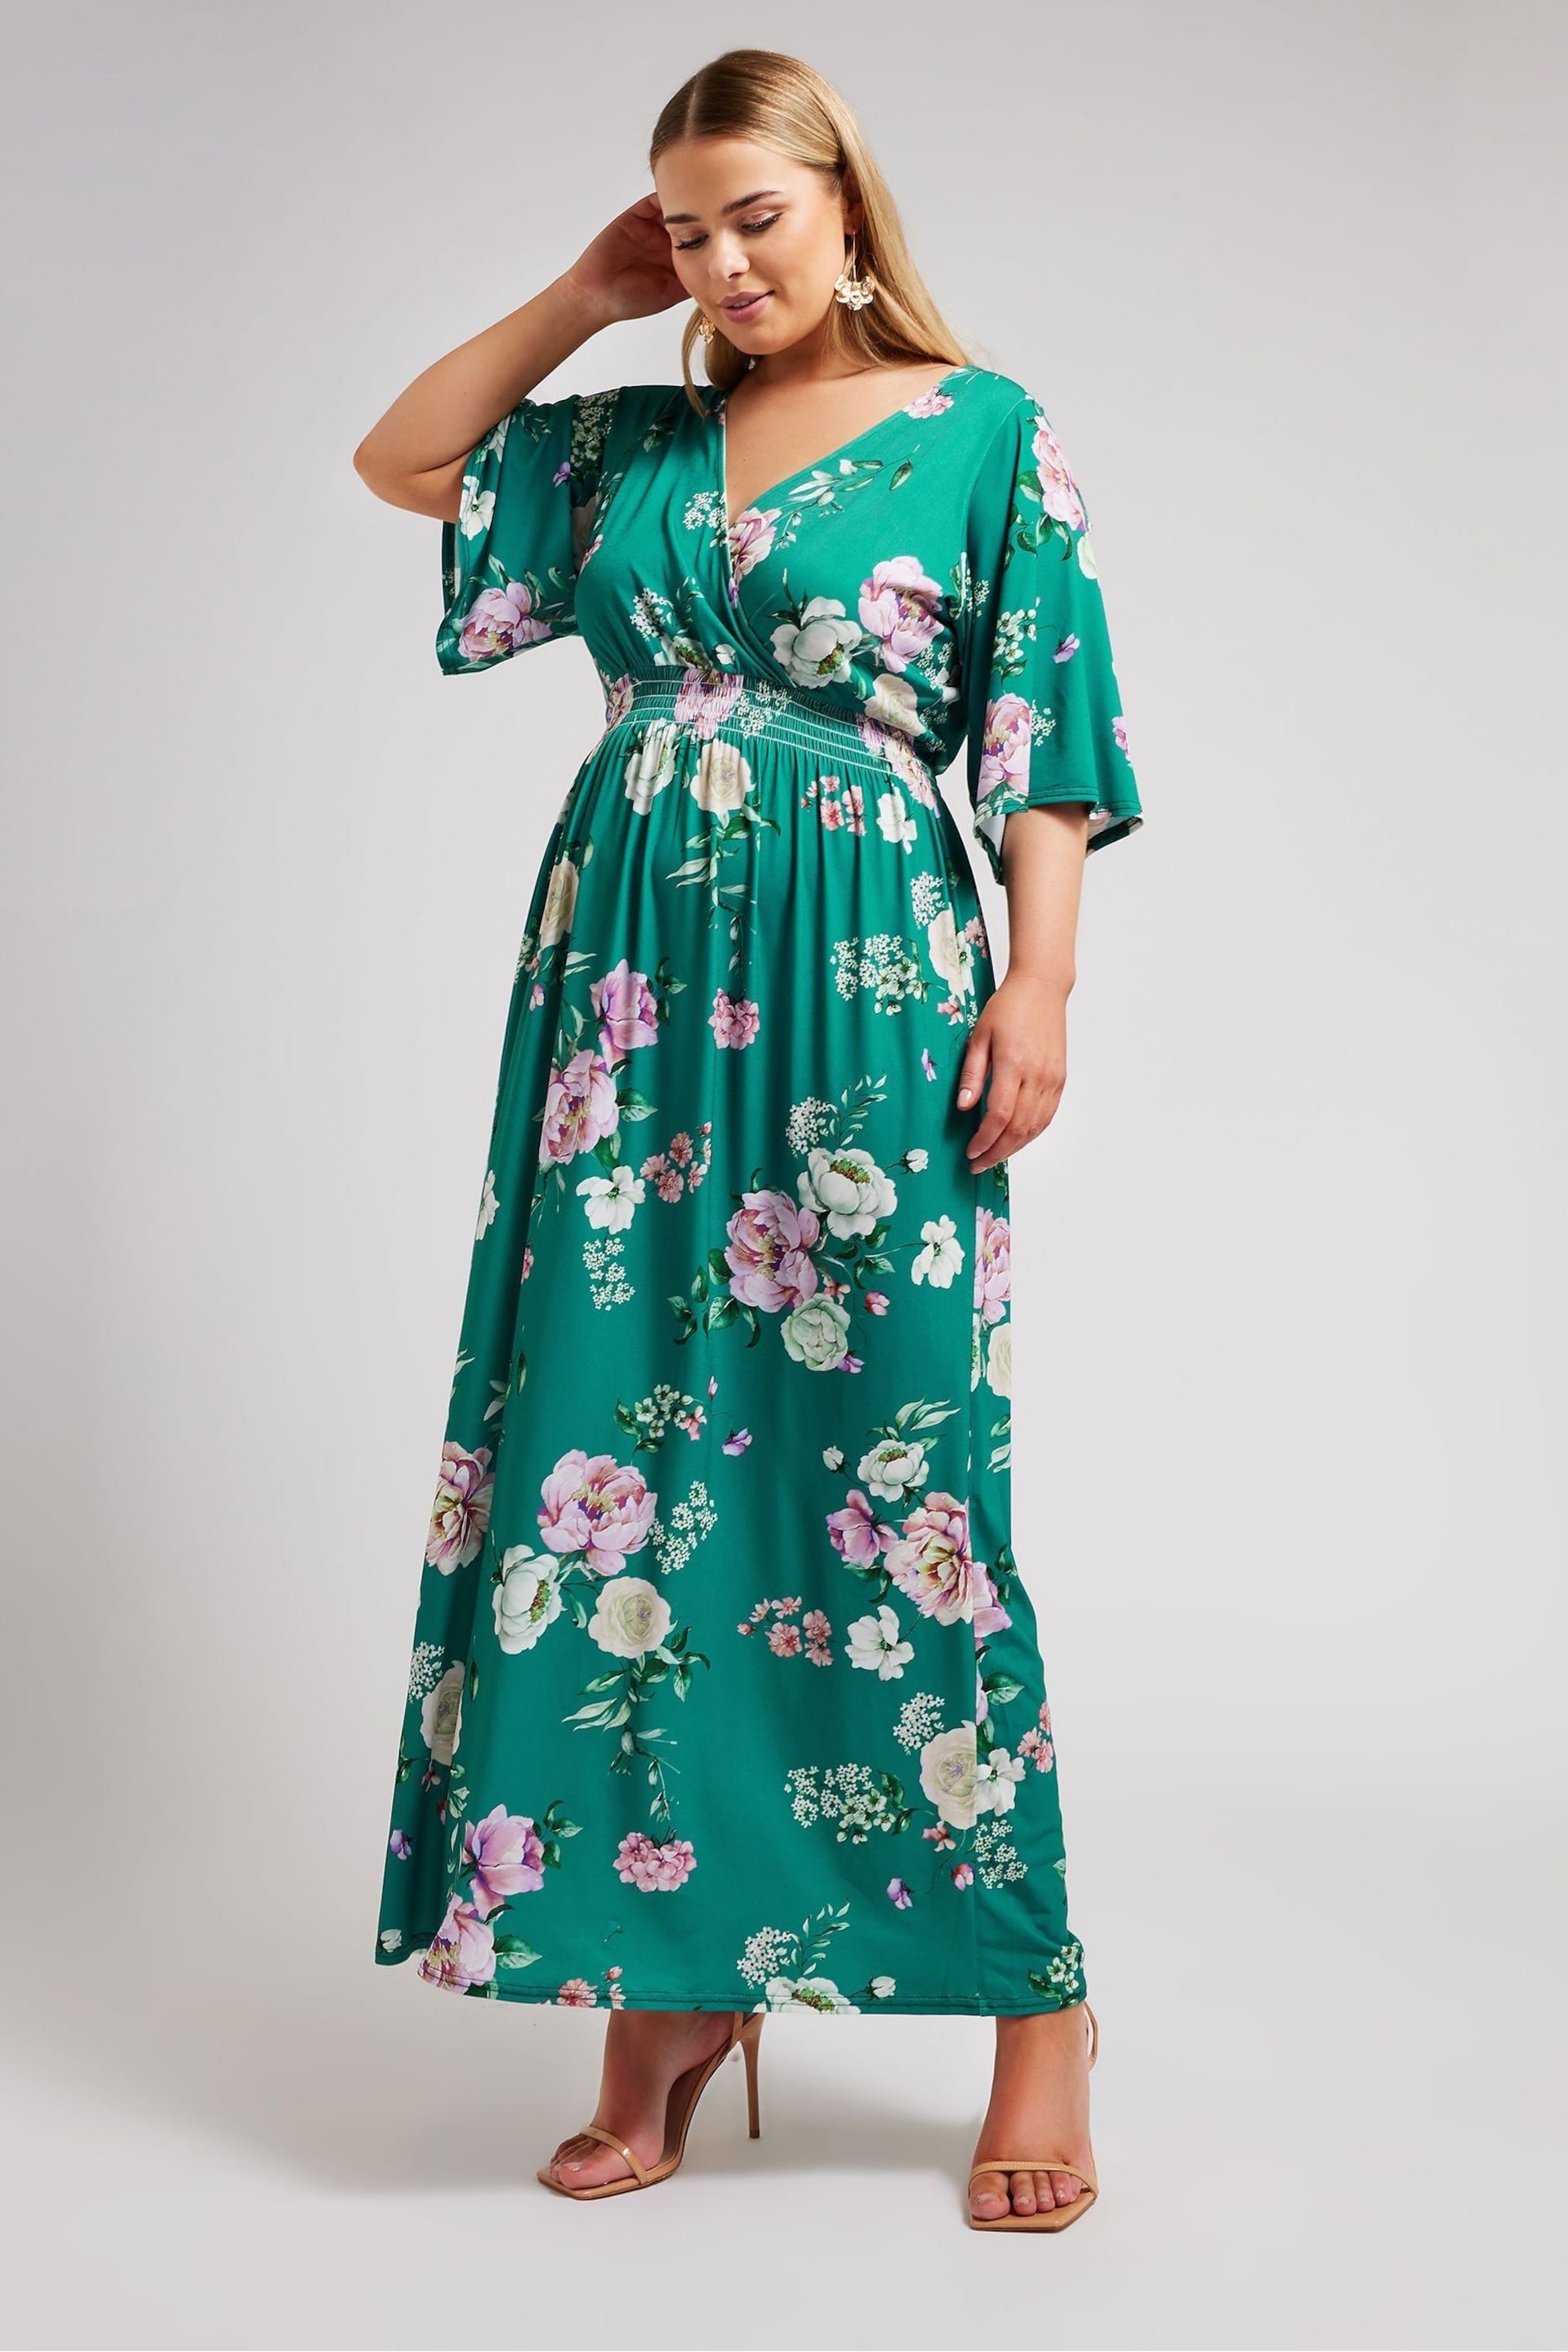 Yours Curve Green London Floral Angel Sleeve Maxi Dress - Image 1 of 4